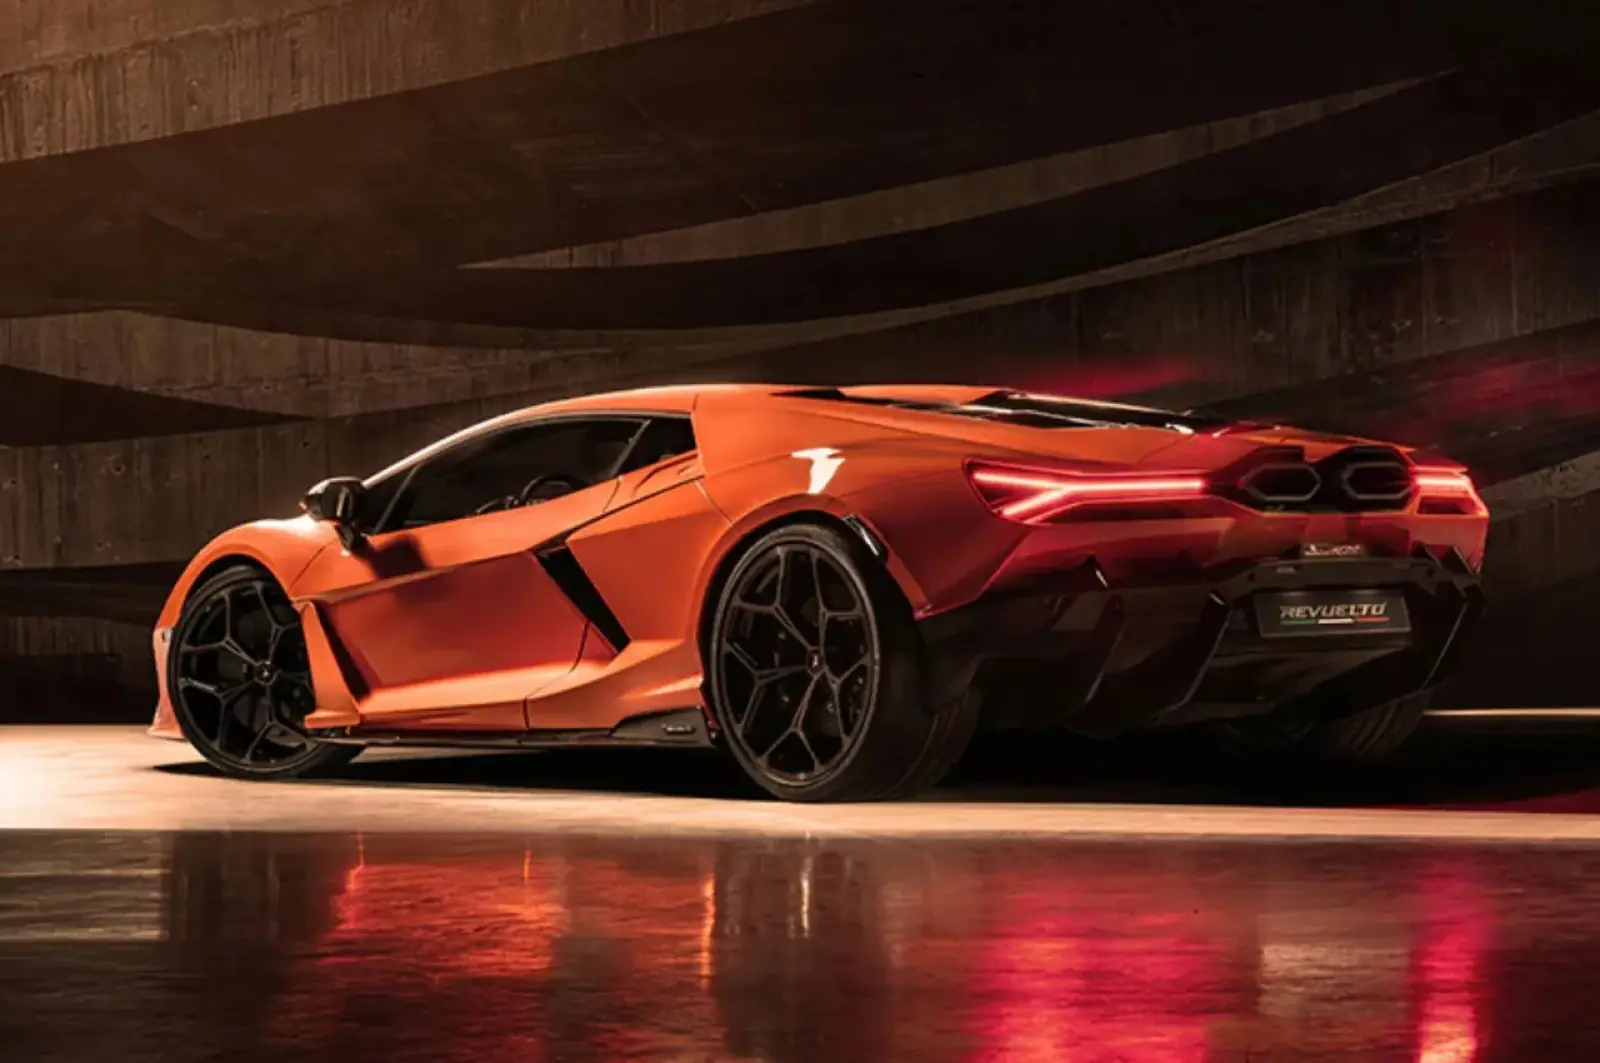 Lamborghini Revuelto will be launched tomorrow, reaches speed of 200 in 7 seconds